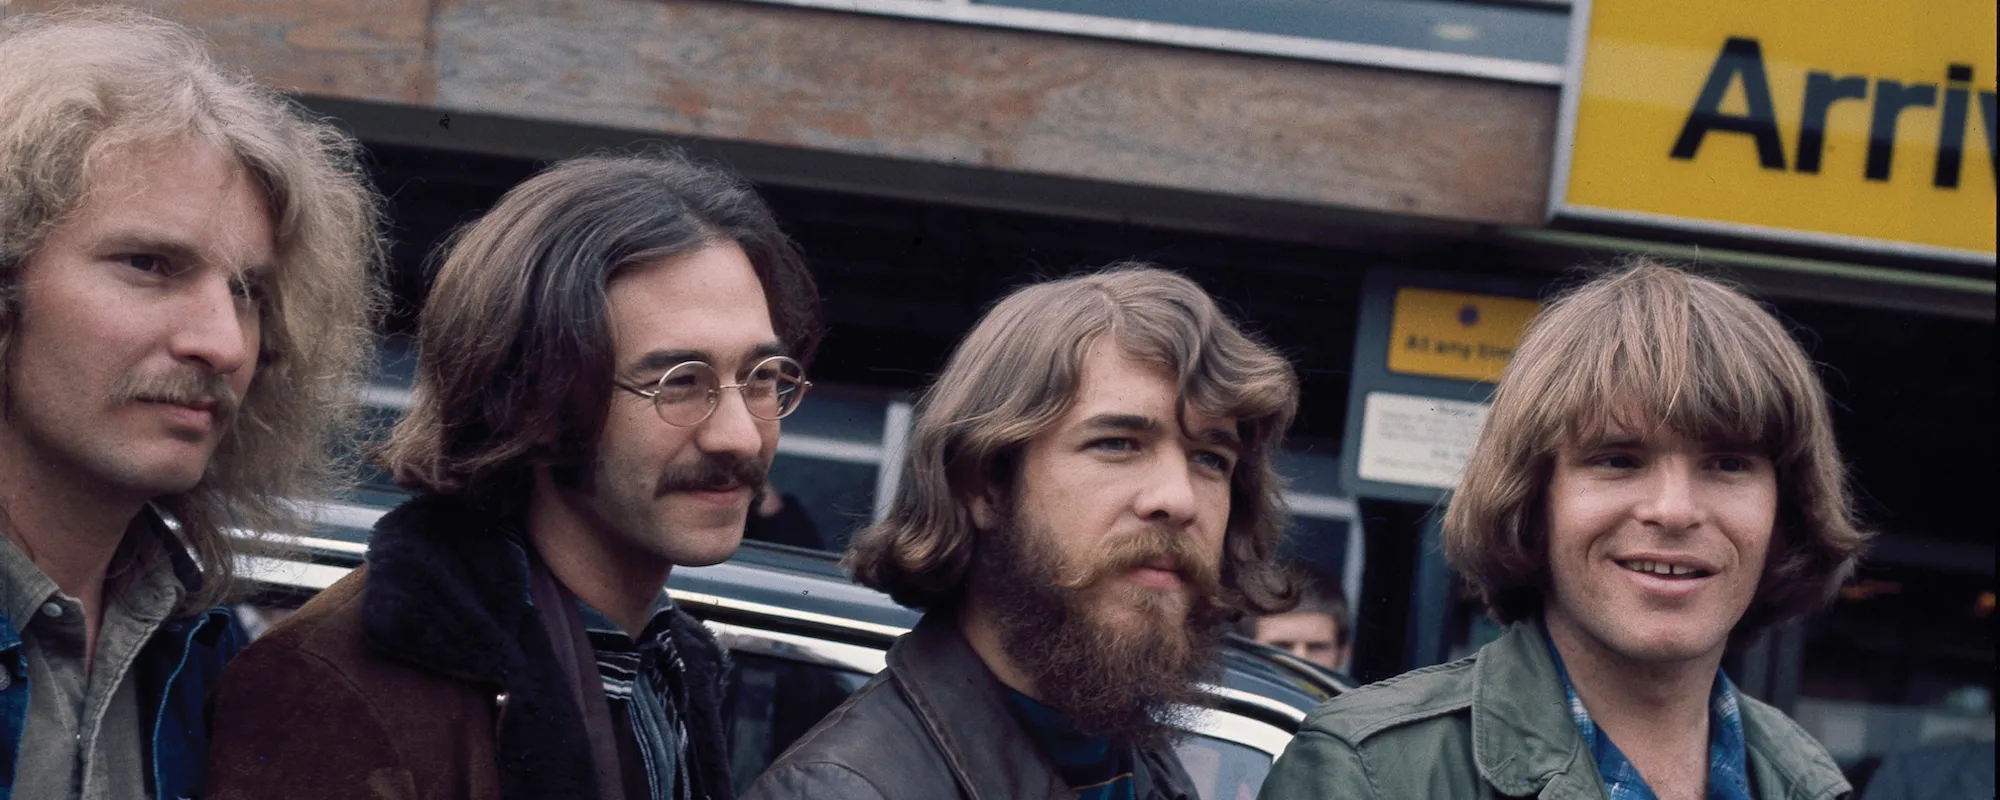 Creedence Clearwater Revival’s Long-Lost Performance of “Fortunate Son” Part of Upcoming 1970 Royal Albert Hall Release